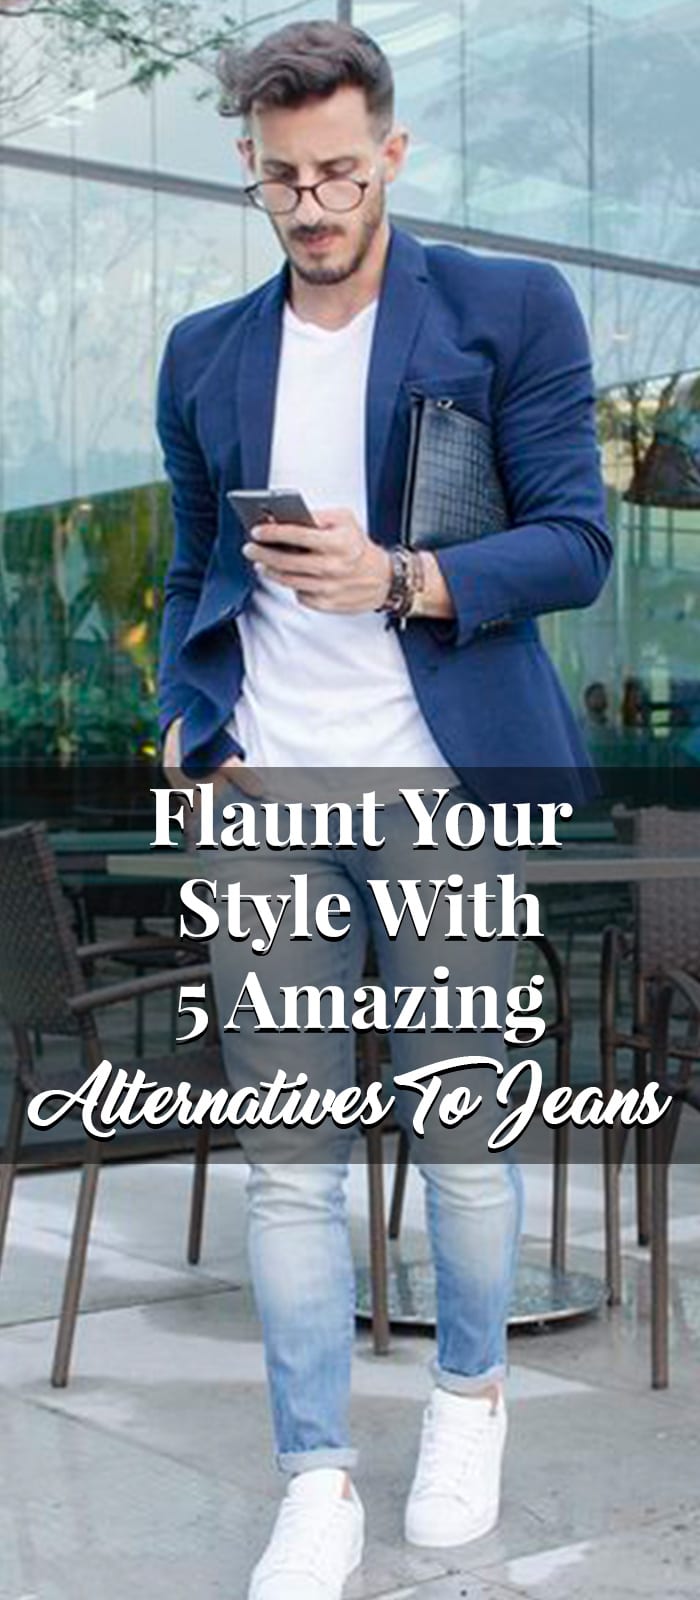 Flaunt Your Style With 5 Amazing Alternatives To Jeans